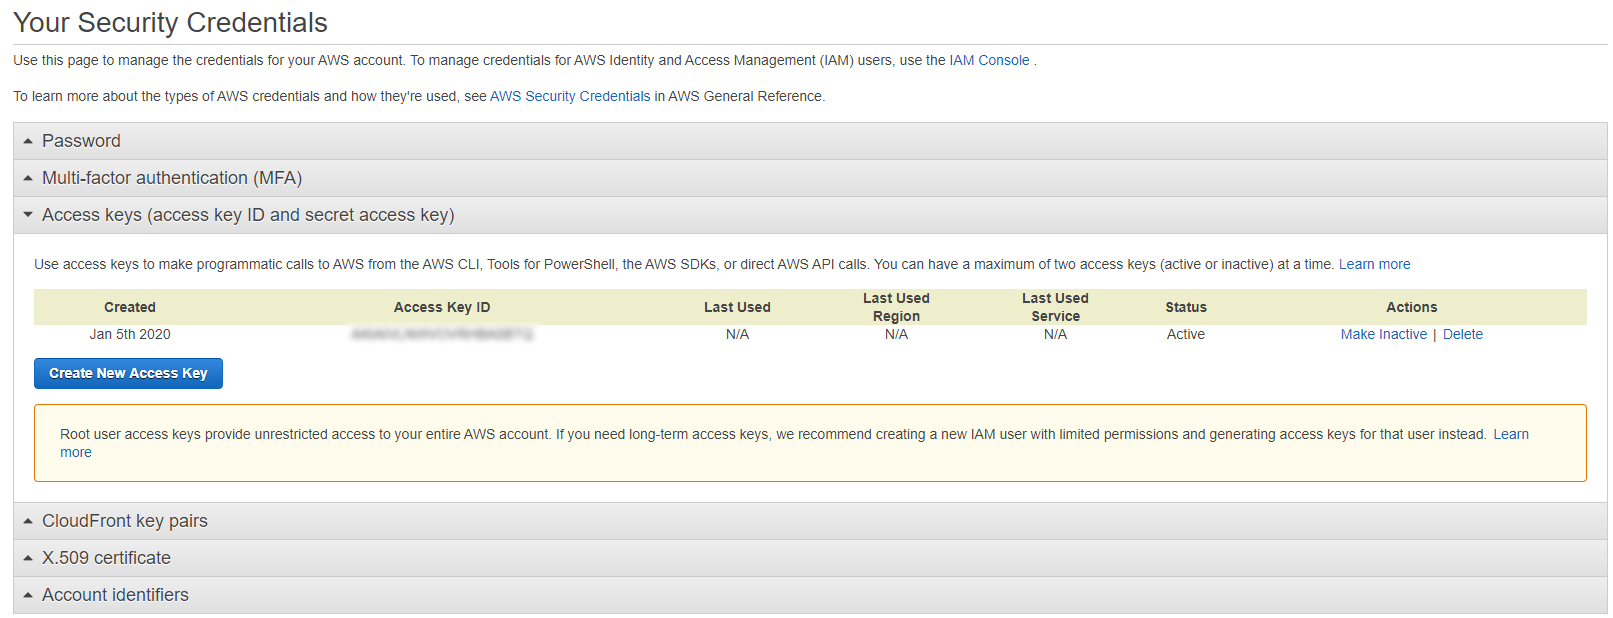 AWS Your Security Credentials
tab